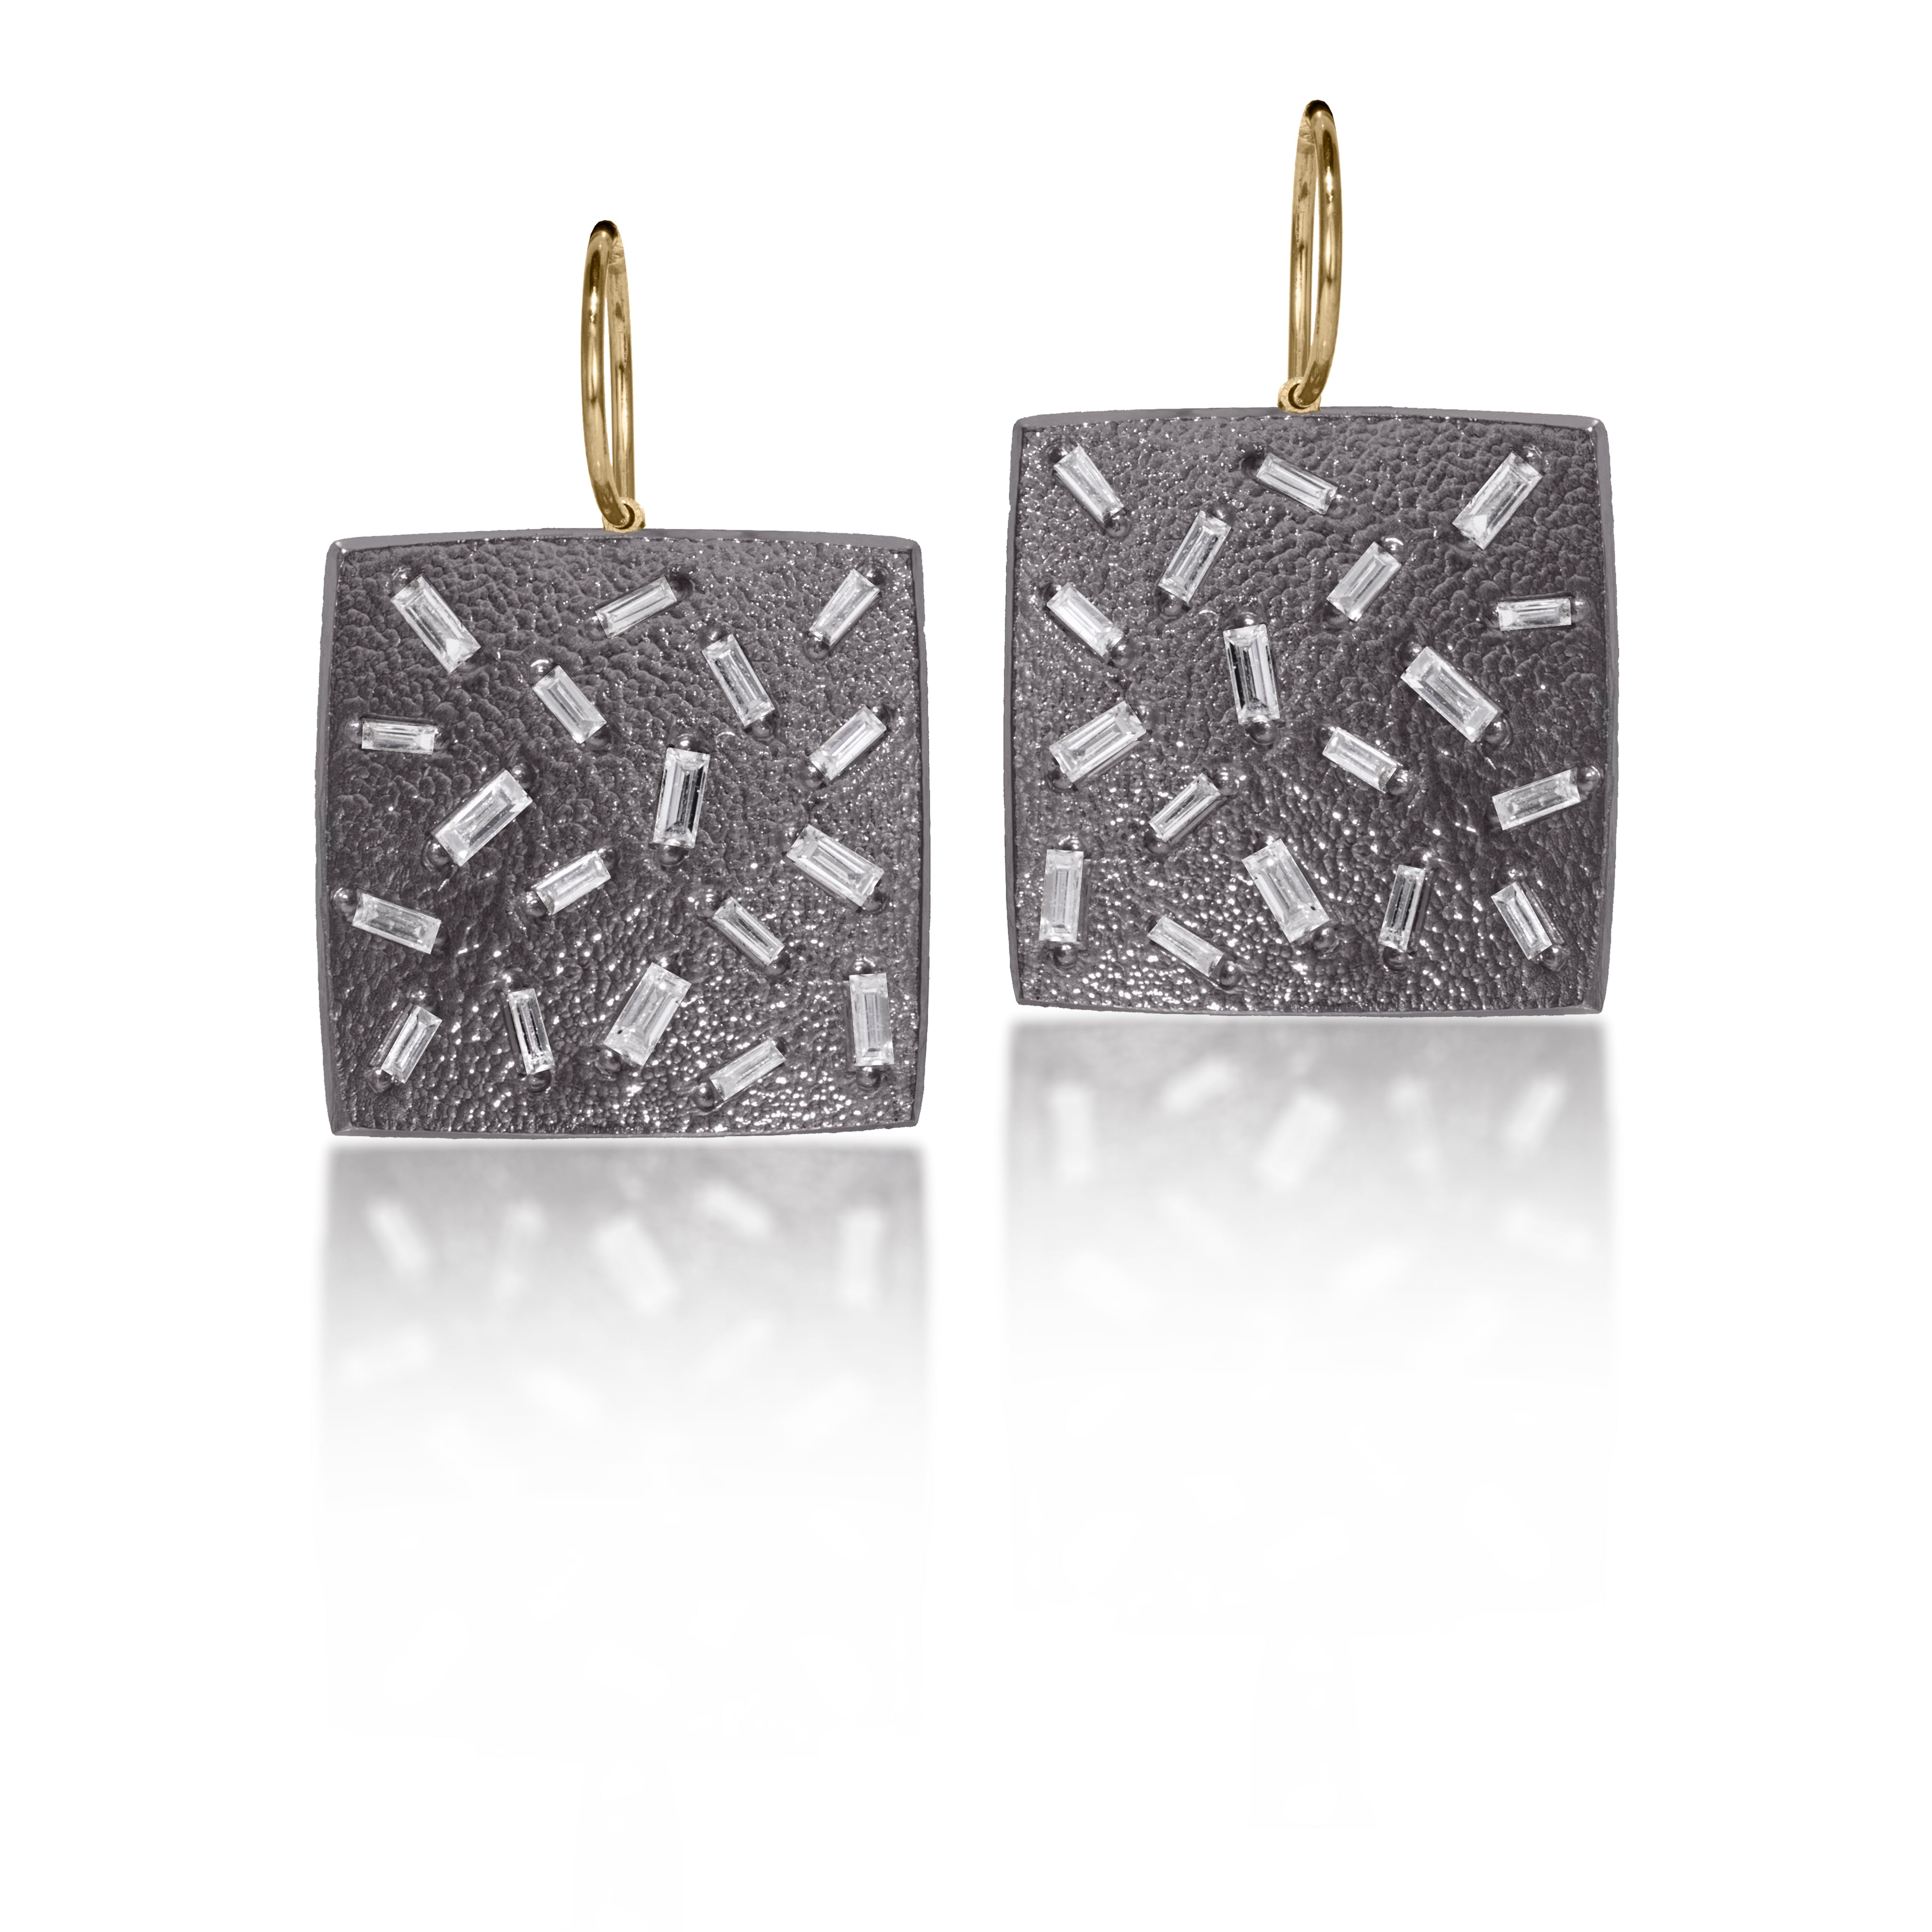 This medium size, simple but dramatic post earring is perfect for everyday or a fabulous night out.  Offered in three richly textured color ways, oxidized sterling, 18k gold, palladium.  Each earring set with 18 white diamond baguettes.  0.972 tcw.